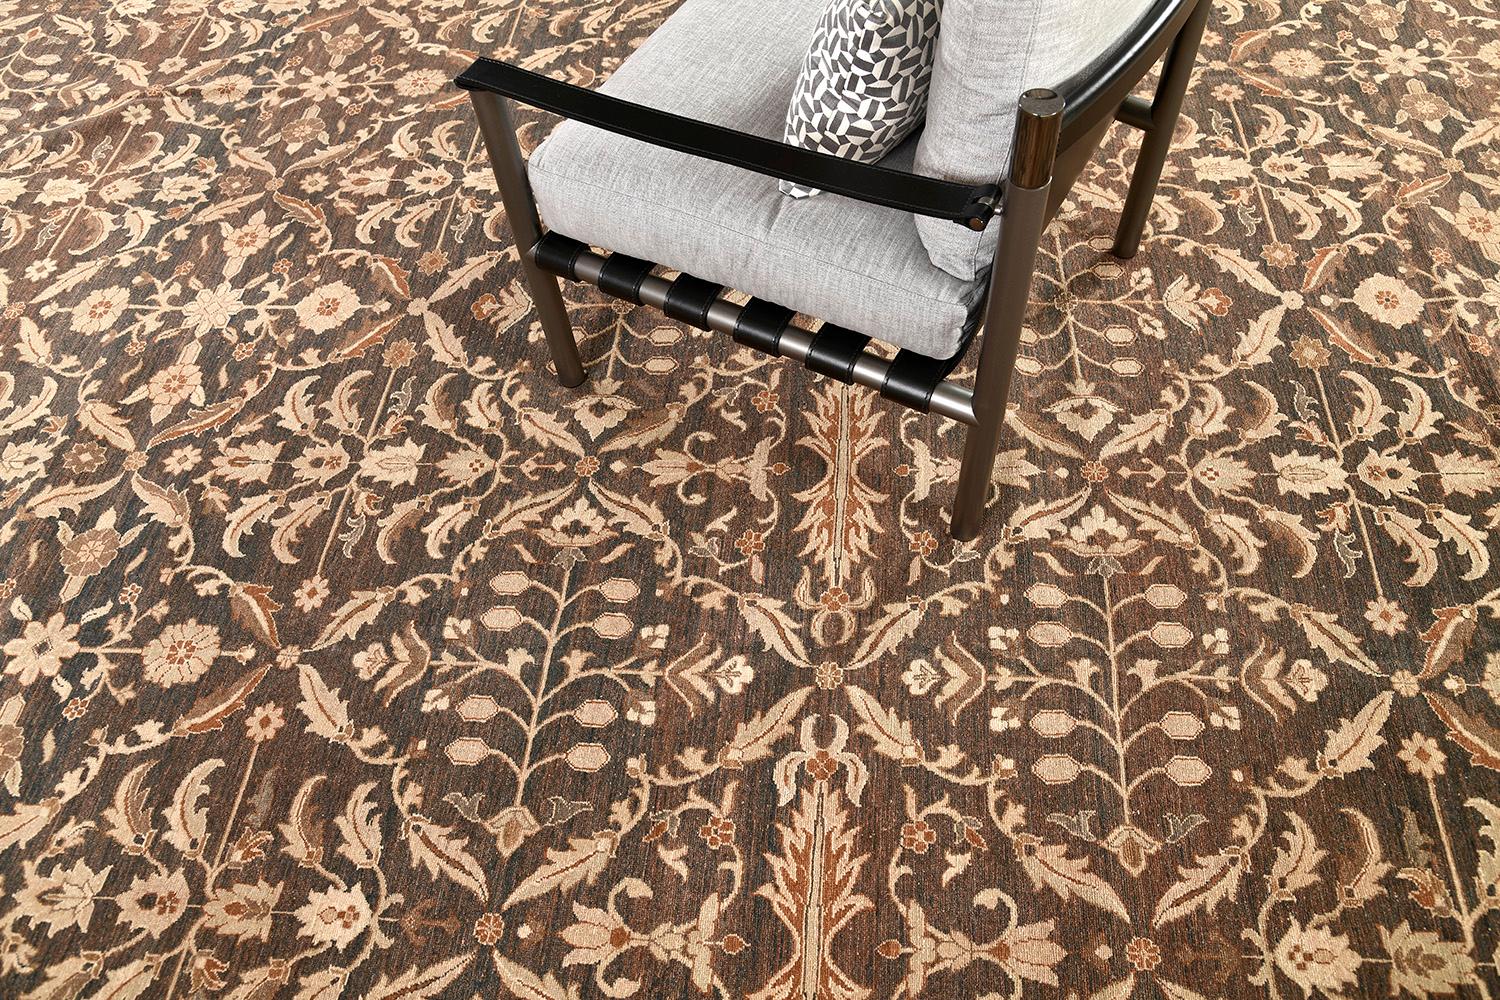 The architectural elements of naturalistic forms, this revival of Amritsar rug in Bliss Collection astounds with its beauty. The all-over pattern of various botanical patterns of blooming palmettes, graceful peonies and serrated leaves a graceful